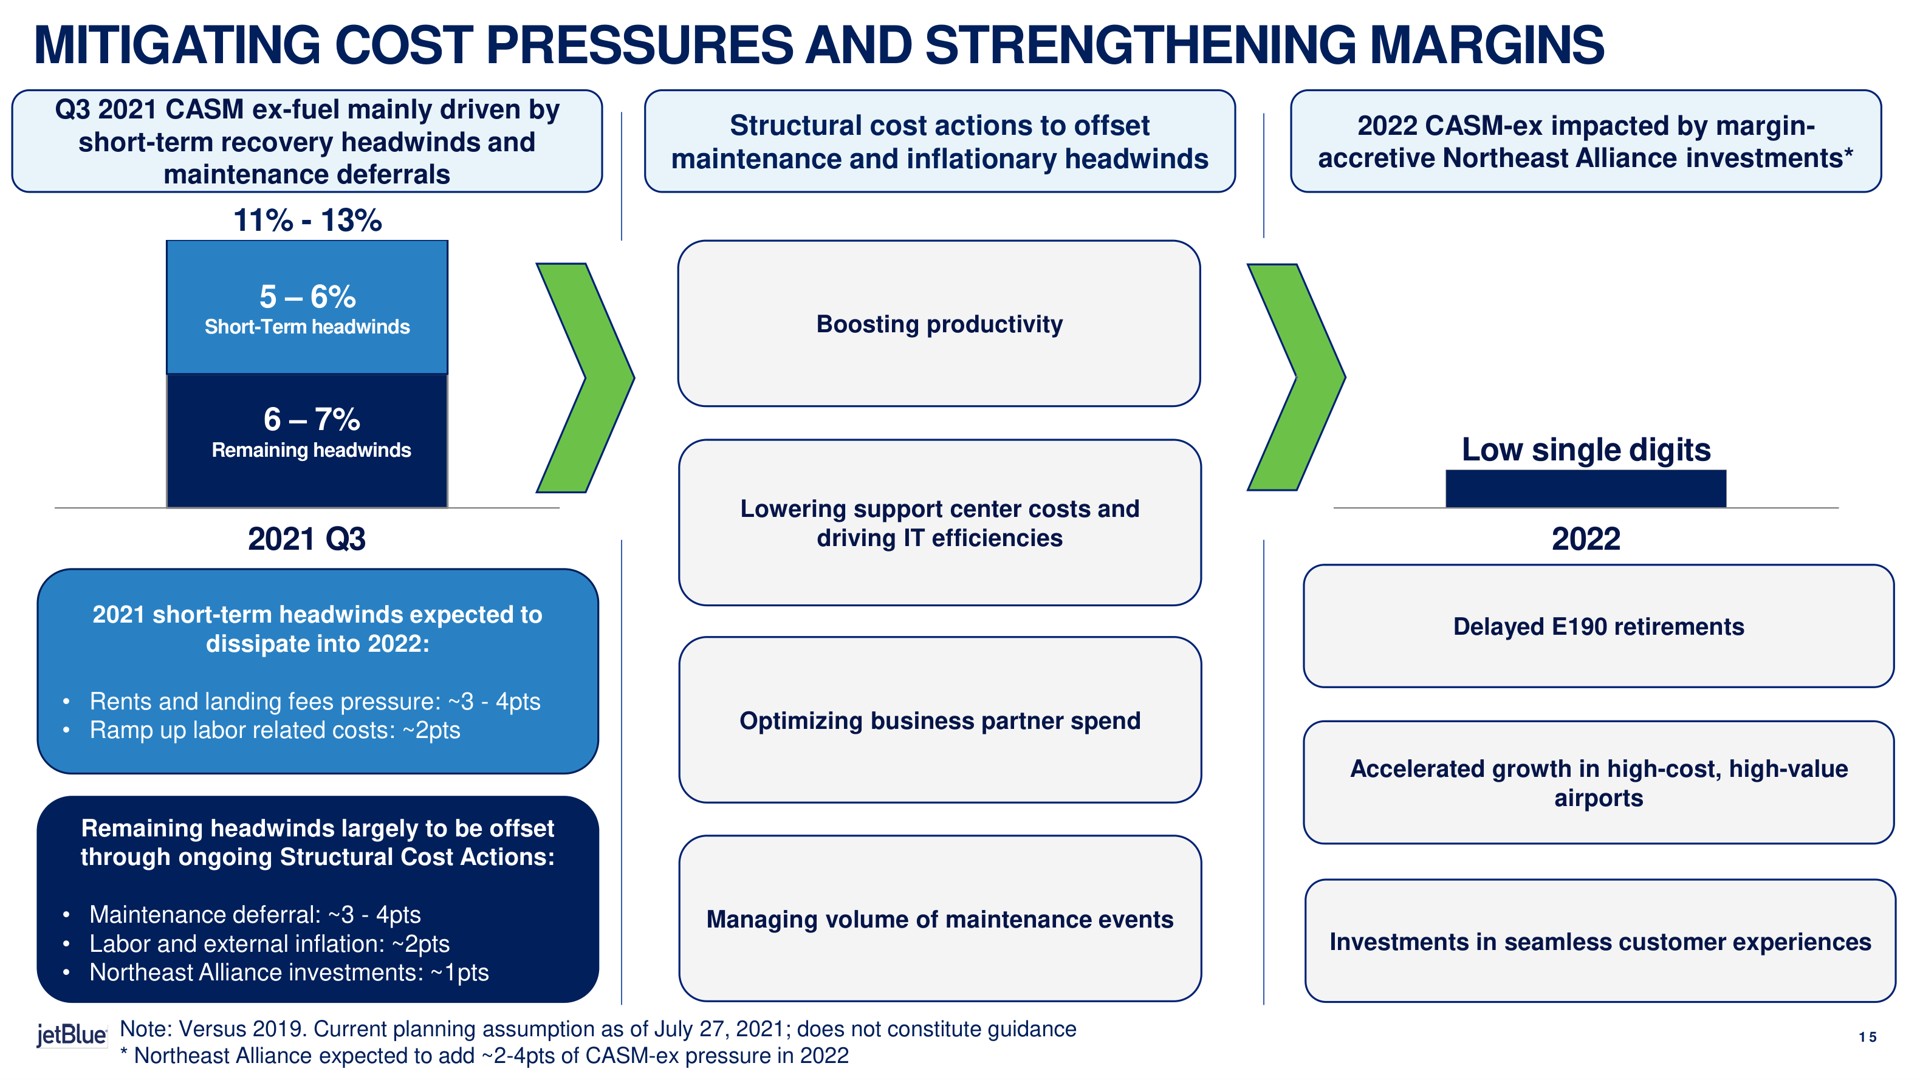 mitigating cost pressures and strengthening margins sow | jetBlue